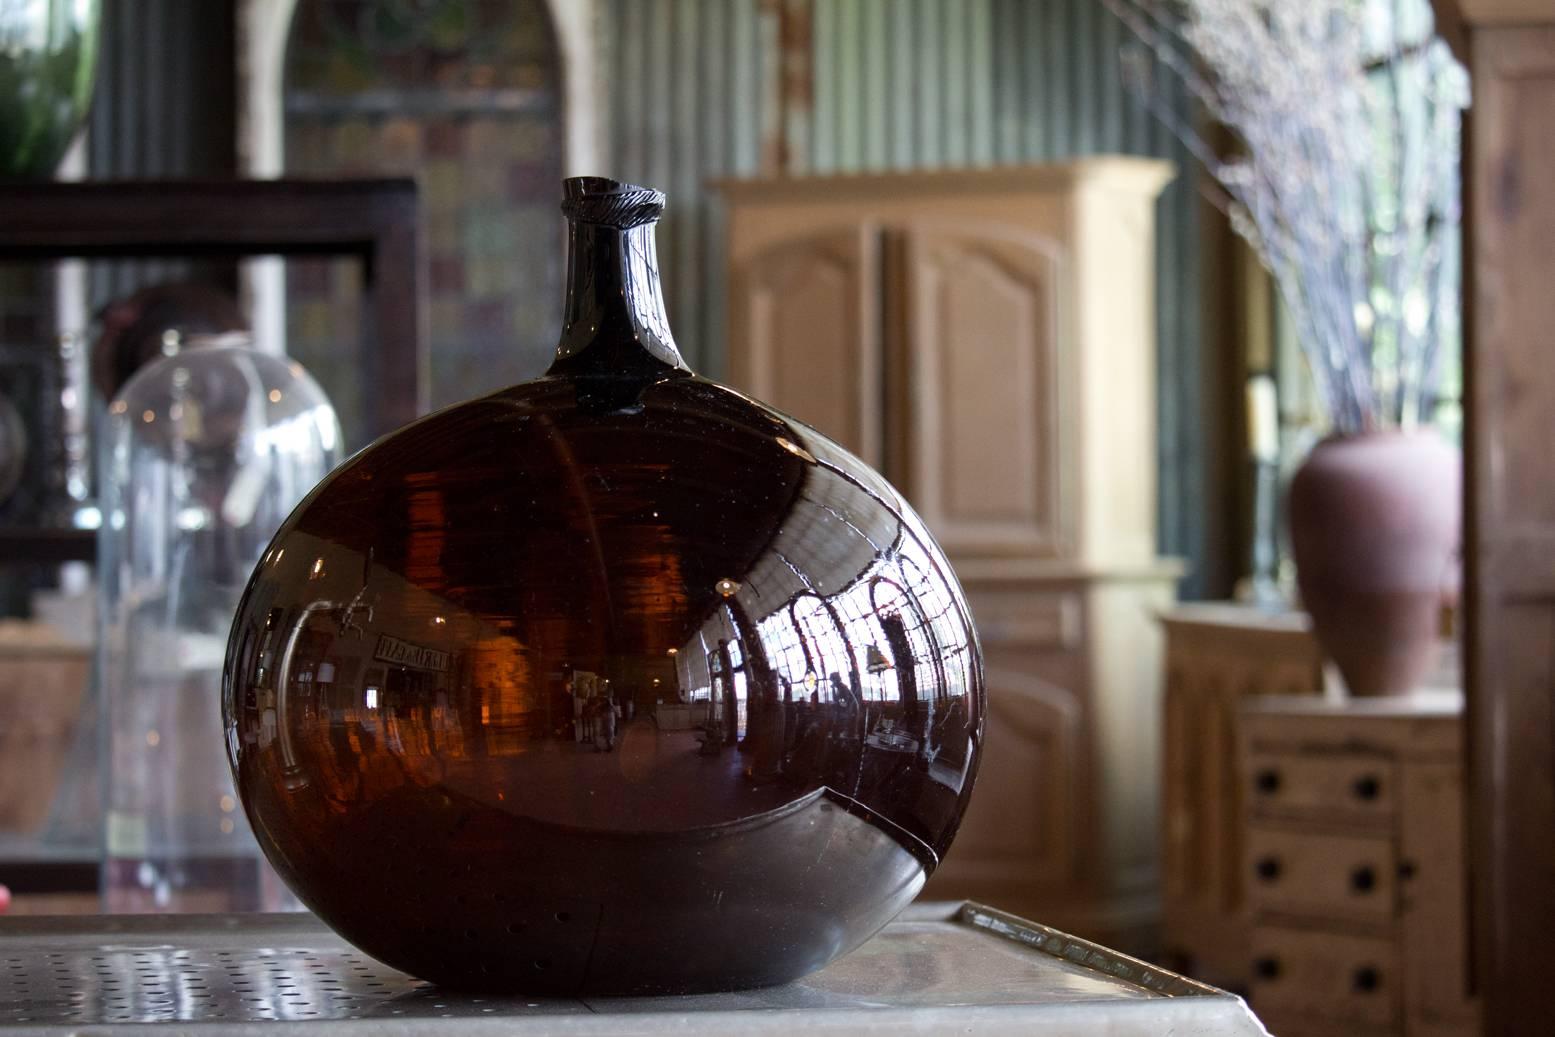 Antique French handblown marron (chestnut) glass wine/spirit keg. We have more available of different sizes. Please contact if you are interested in more than one!